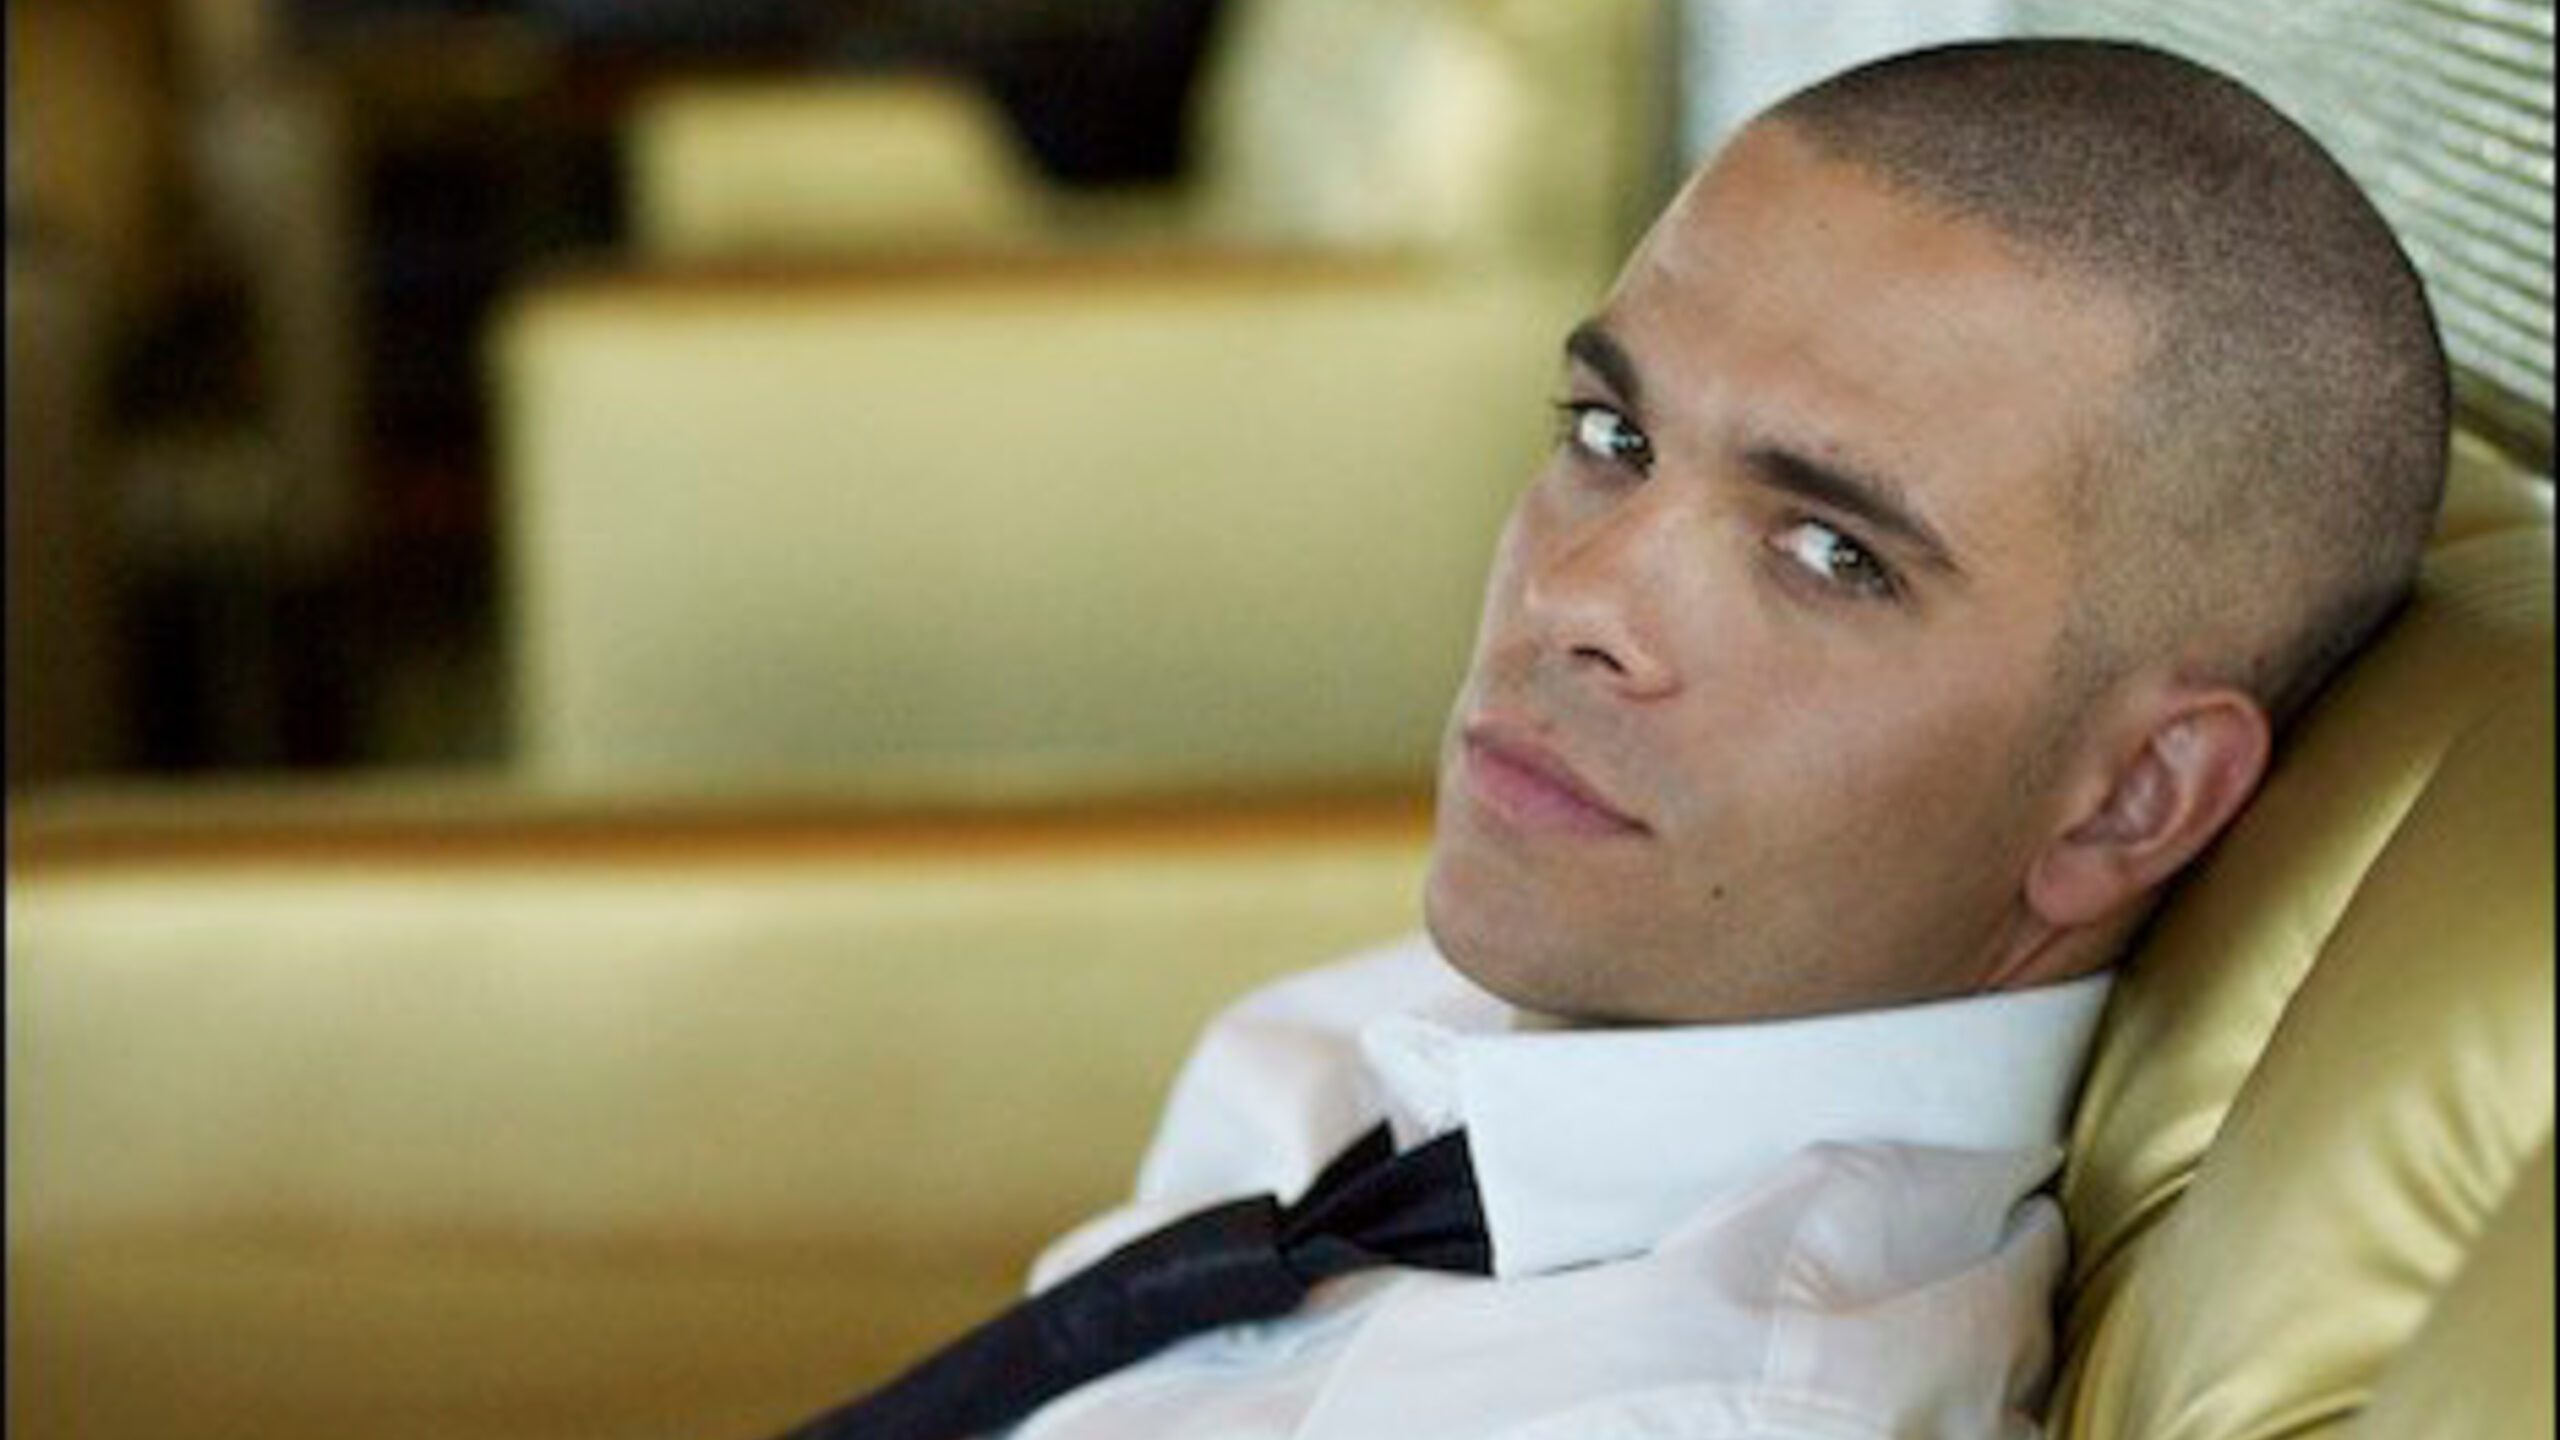 ‘Glee’ actor Mark Salling indicted for child porn